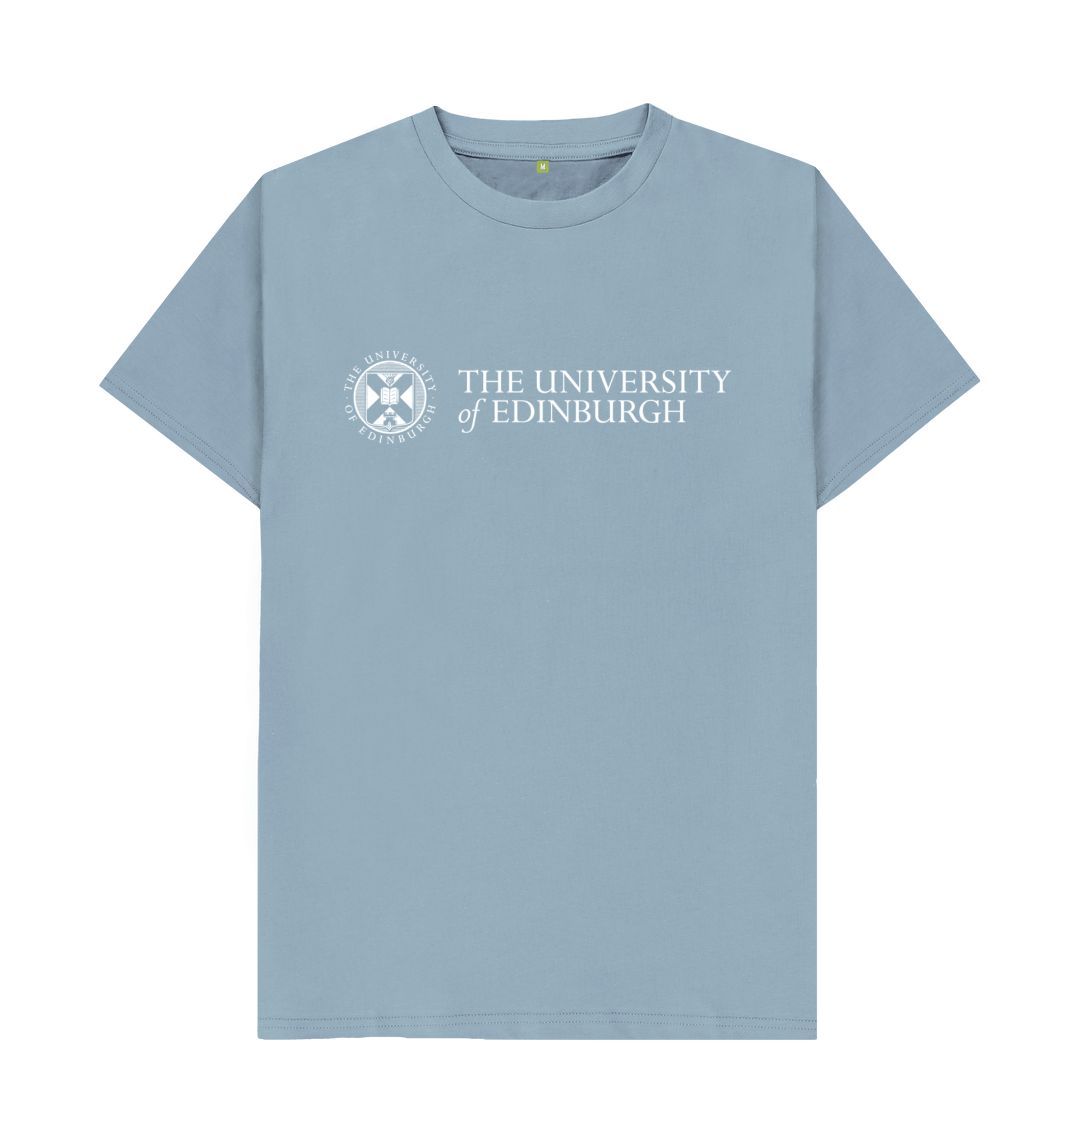 A stone blue t-shirt with the University logo printed across the chest in white